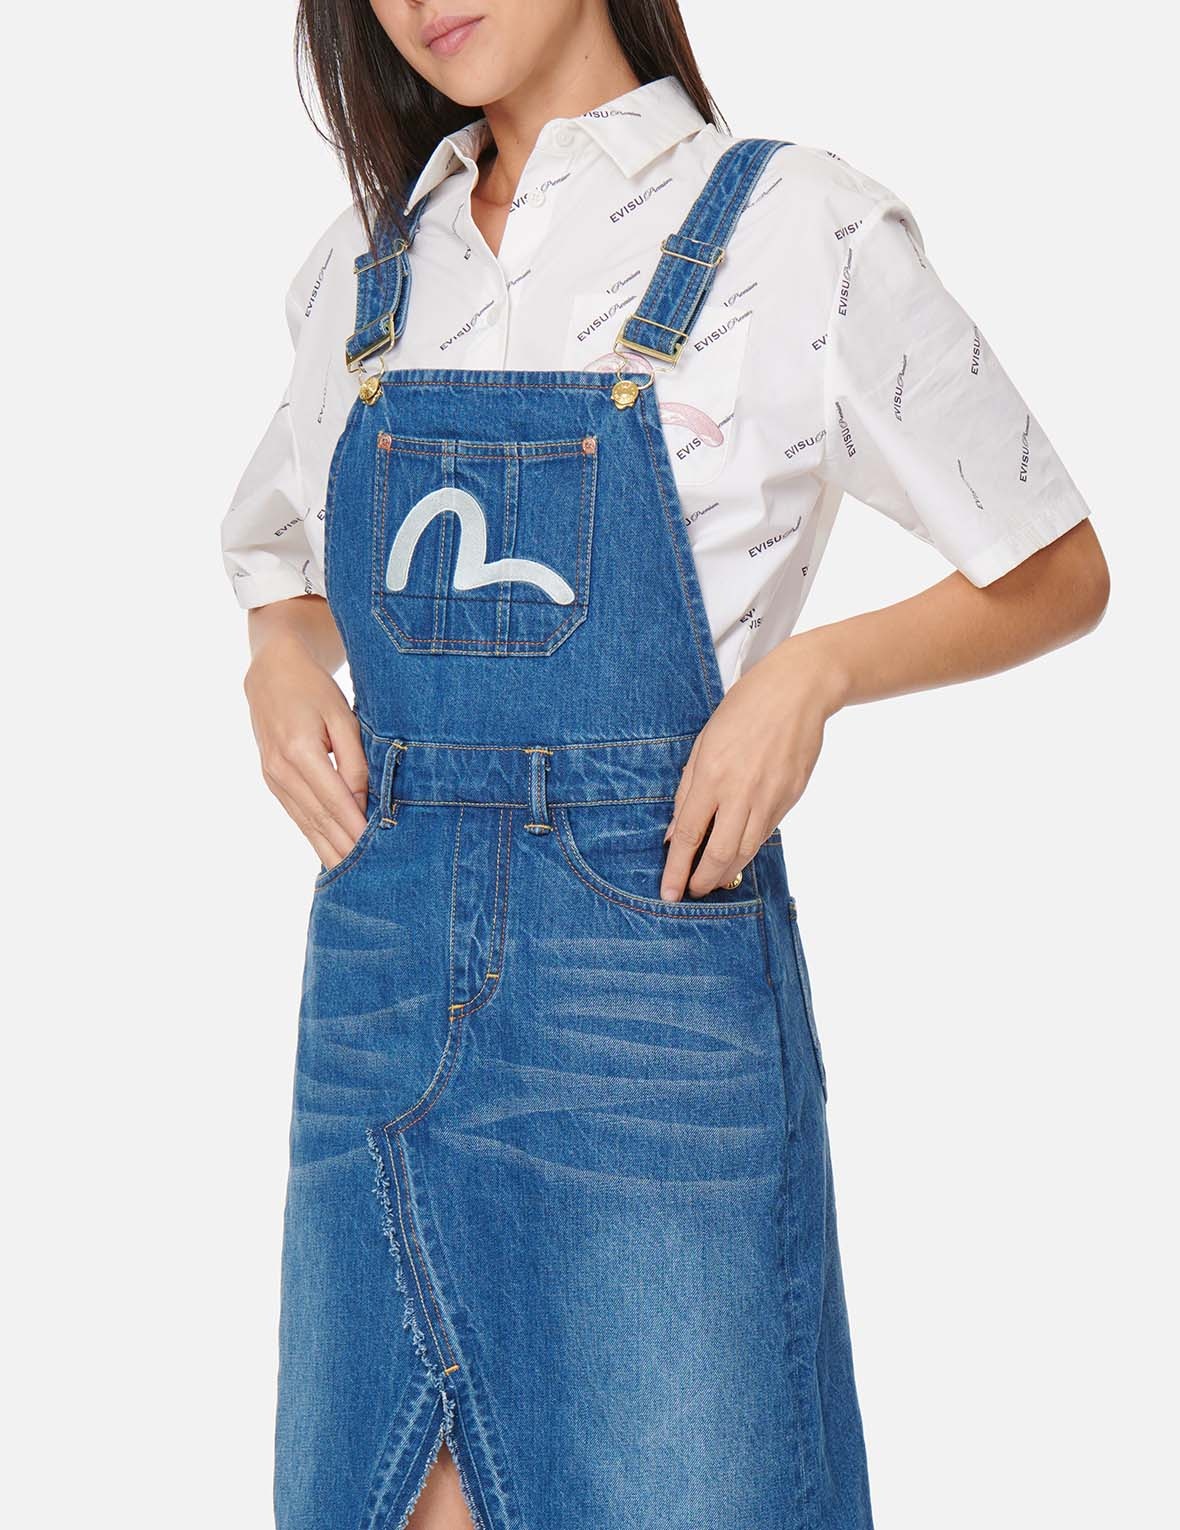 SEAGULL EMBROIDERED DENIM DUNGAREE DRESS - 8